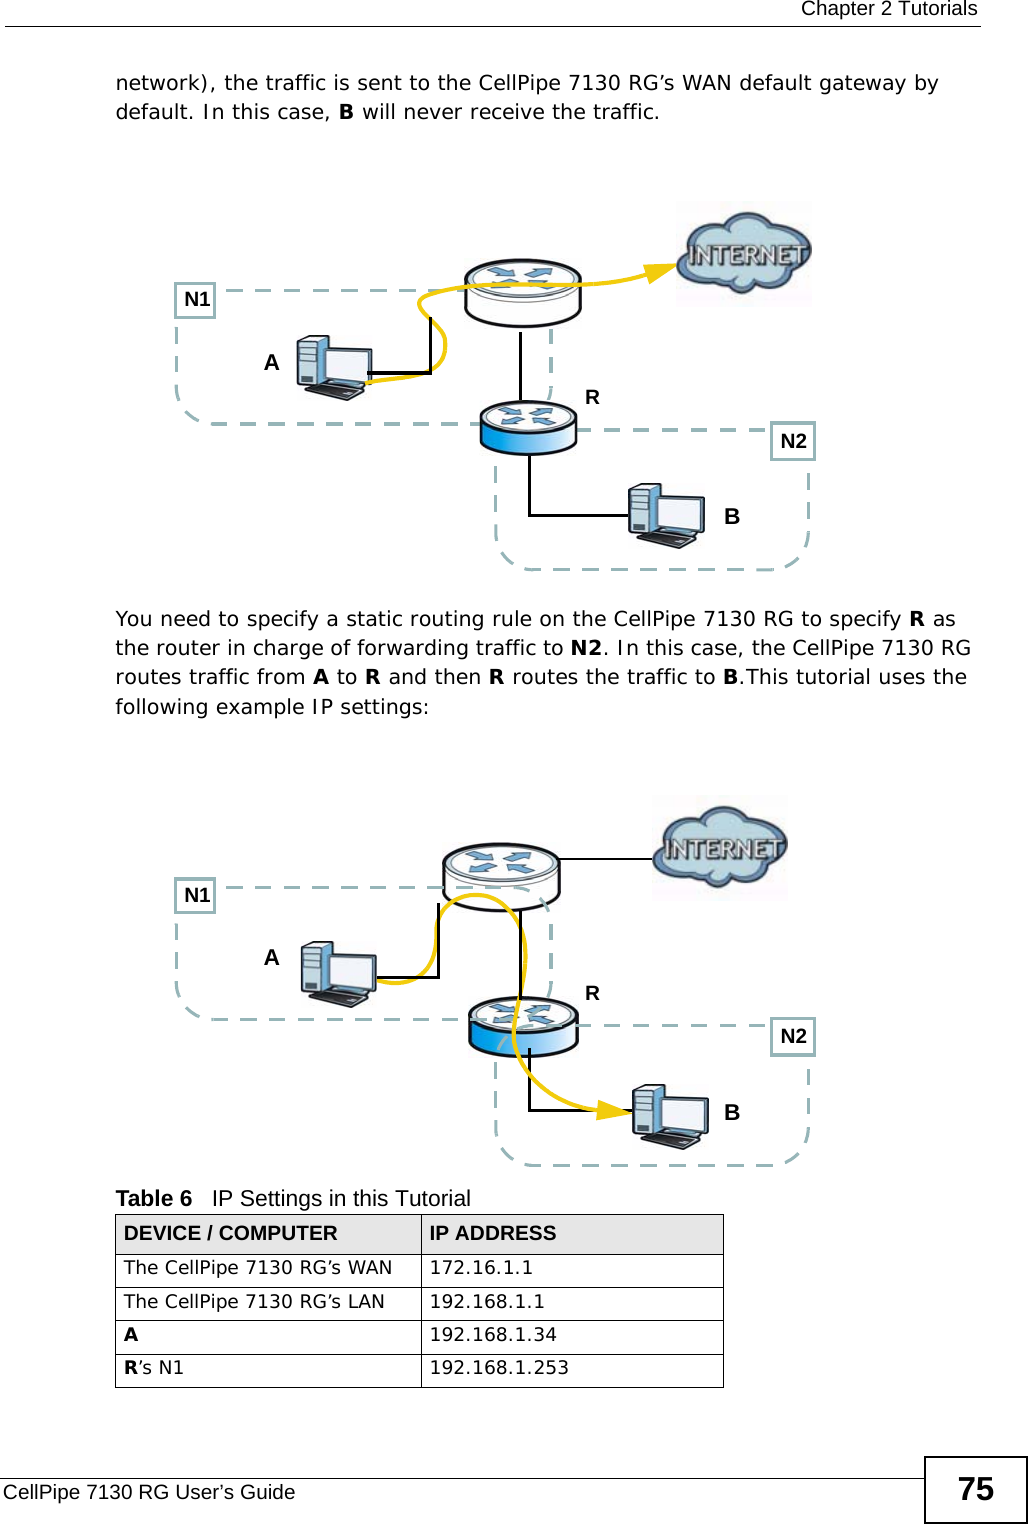  Chapter 2 TutorialsCellPipe 7130 RG User’s Guide 75network), the traffic is sent to the CellPipe 7130 RG’s WAN default gateway by default. In this case, B will never receive the traffic.You need to specify a static routing rule on the CellPipe 7130 RG to specify R as the router in charge of forwarding traffic to N2. In this case, the CellPipe 7130 RG routes traffic from A to R and then R routes the traffic to B.This tutorial uses the following example IP settings:Table 6   IP Settings in this TutorialDEVICE / COMPUTER IP ADDRESSThe CellPipe 7130 RG’s WAN 172.16.1.1The CellPipe 7130 RG’s LAN 192.168.1.1A192.168.1.34R’s N1  192.168.1.253N2BN1ARN2BN1AR